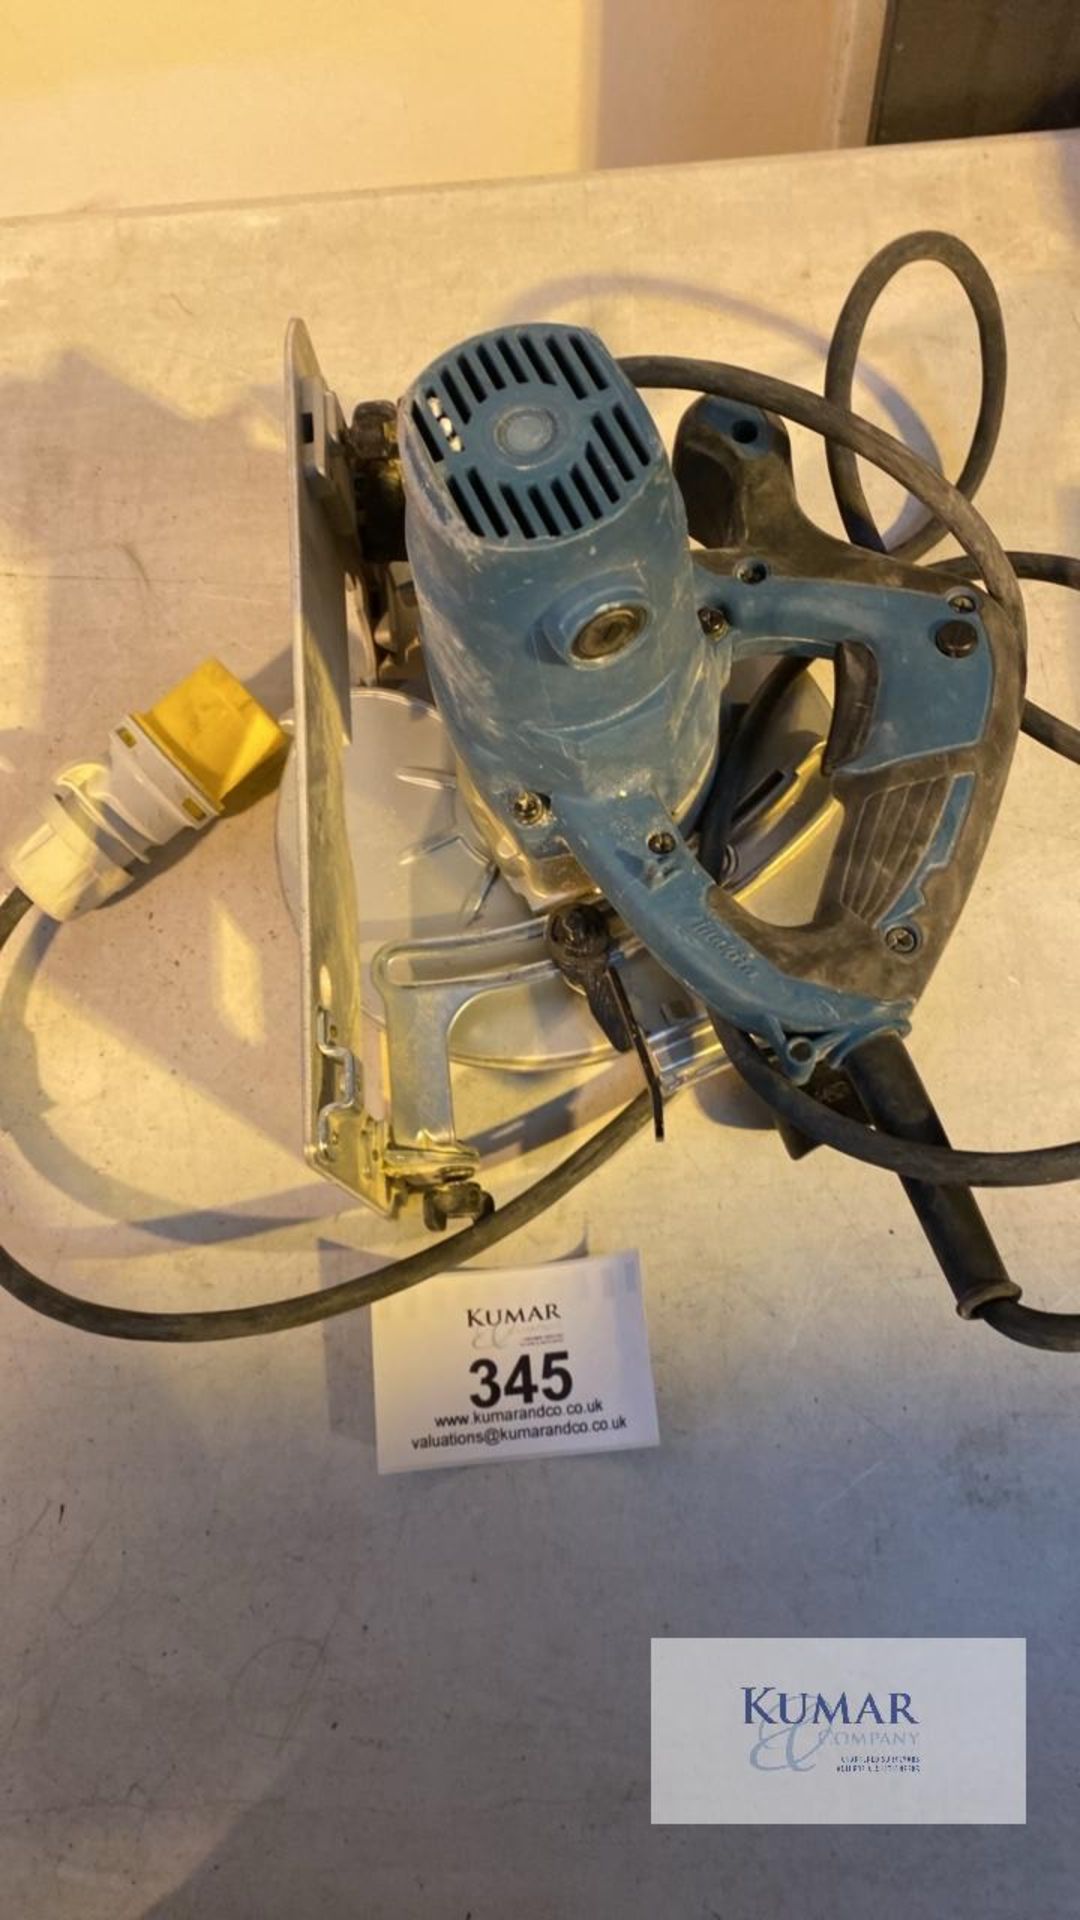 Makita HS7601J 110 Volt Circular Saw, Serial No.383733G (11/2018) in Carry Case - Image 4 of 5